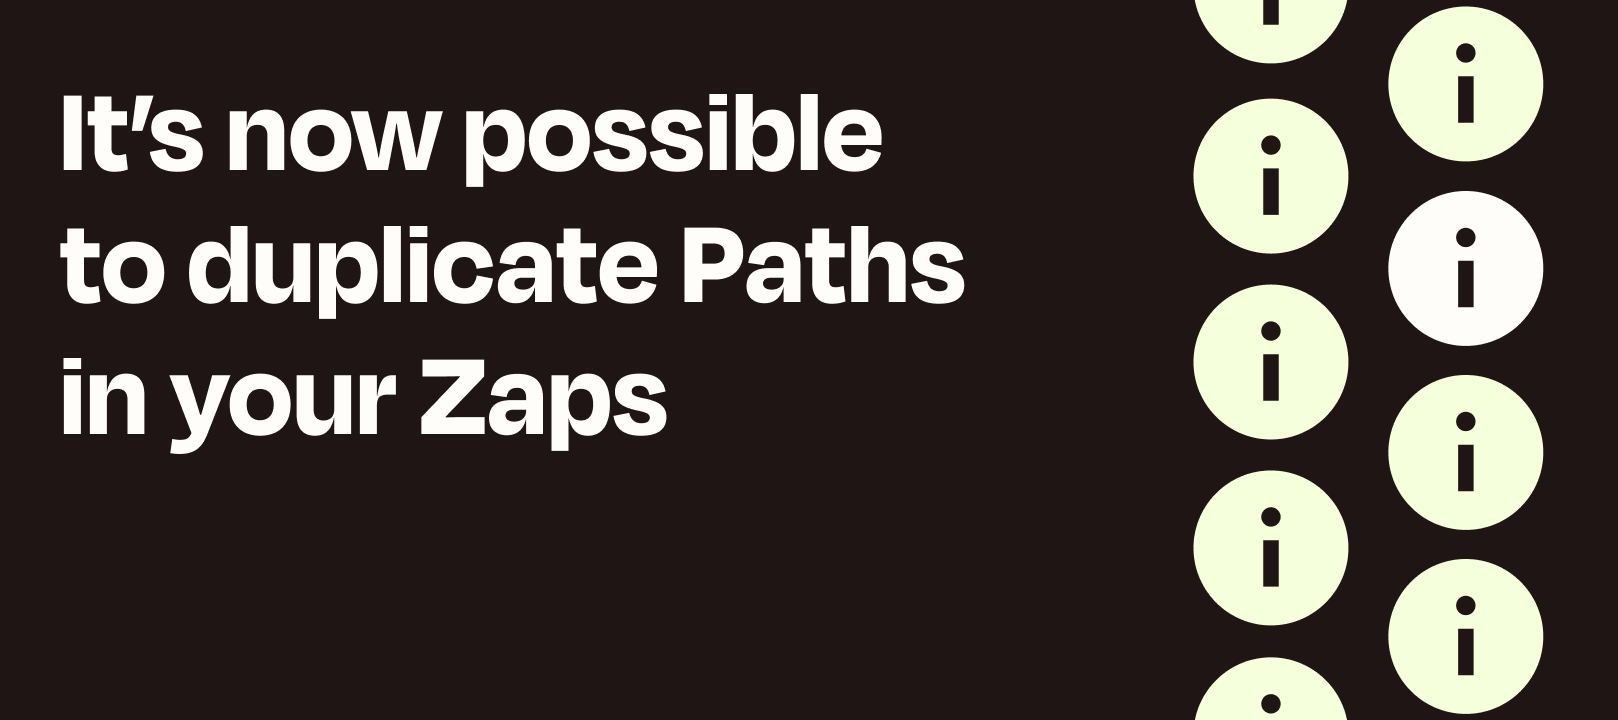 You can now duplicate existing Paths in your Zaps